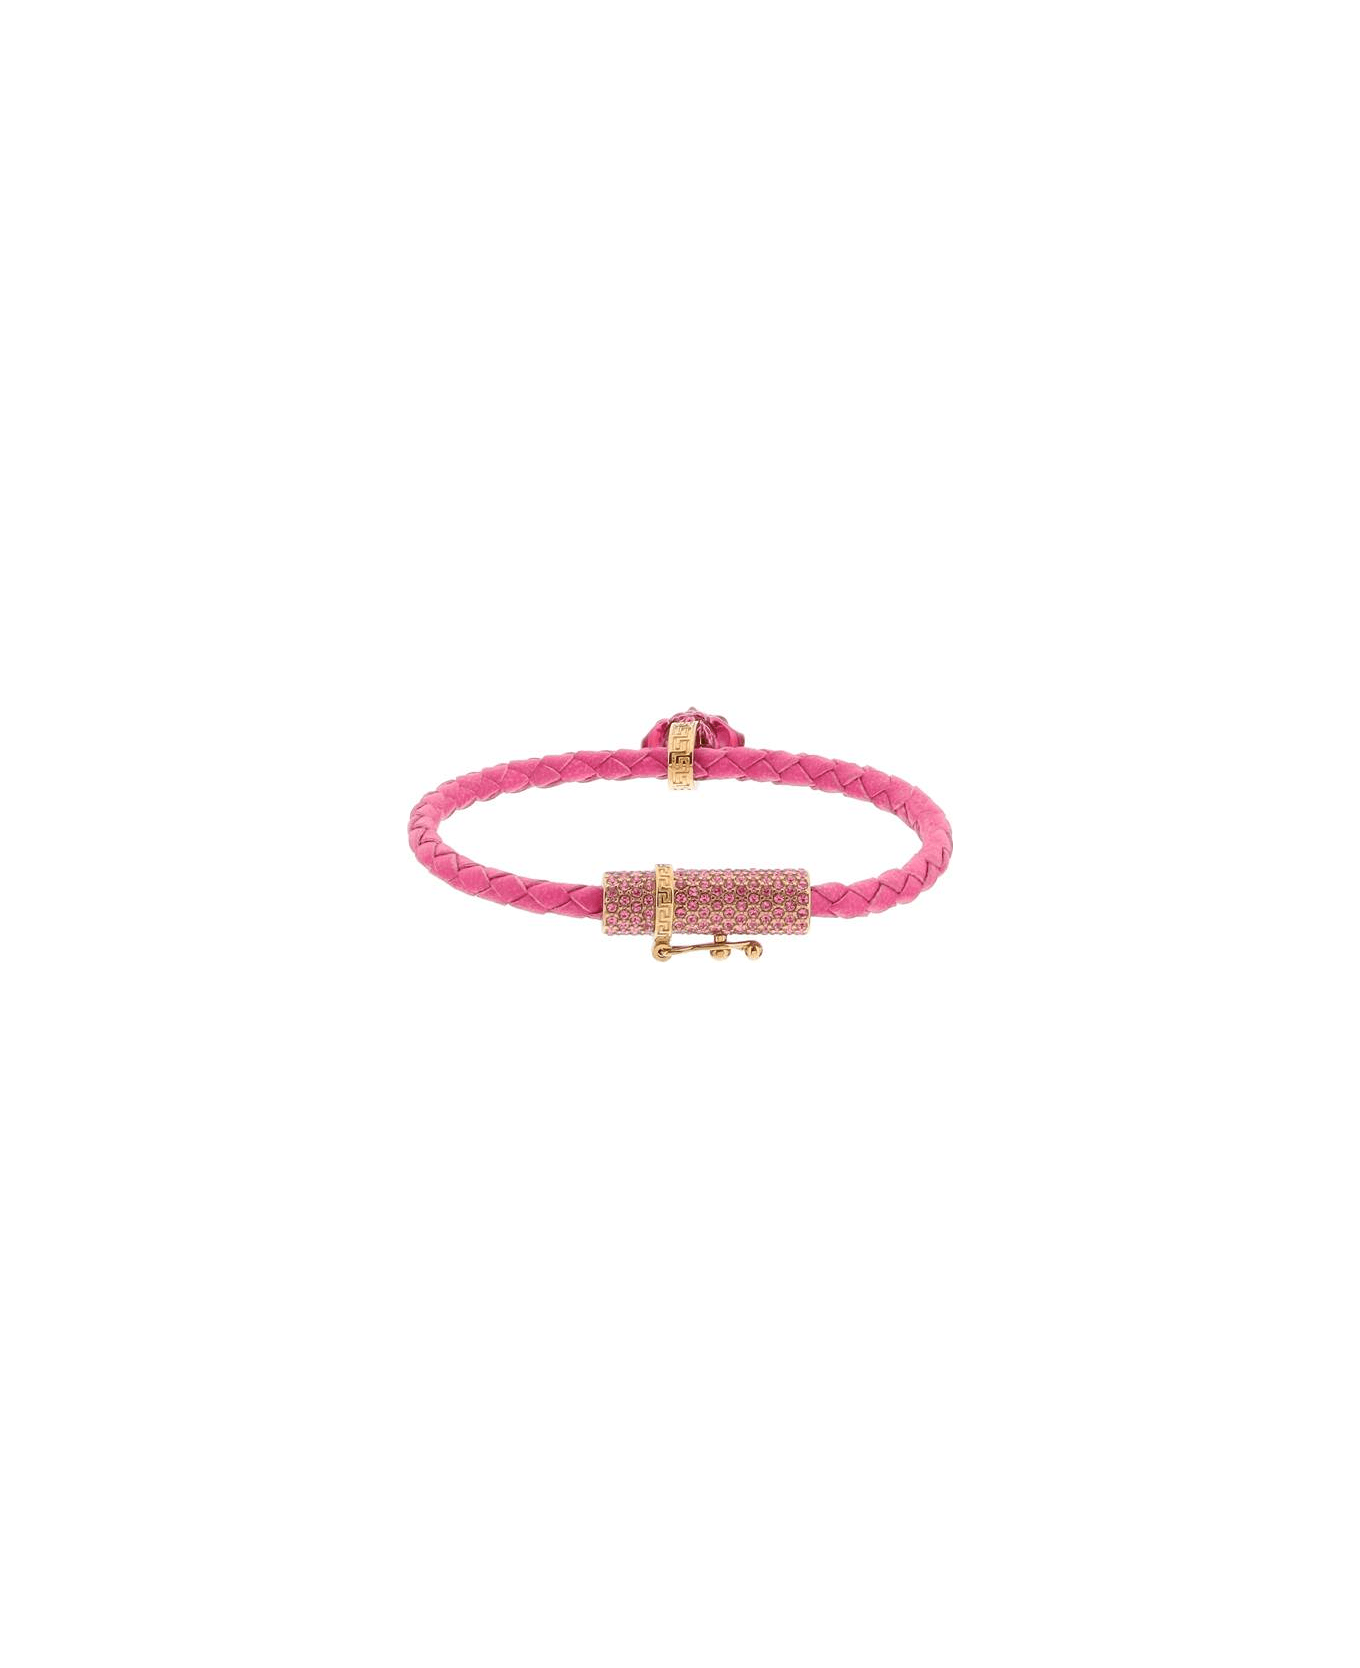 Versace Braided Leather Bracelet - Glossy Pink-oro Versace ブレスレット